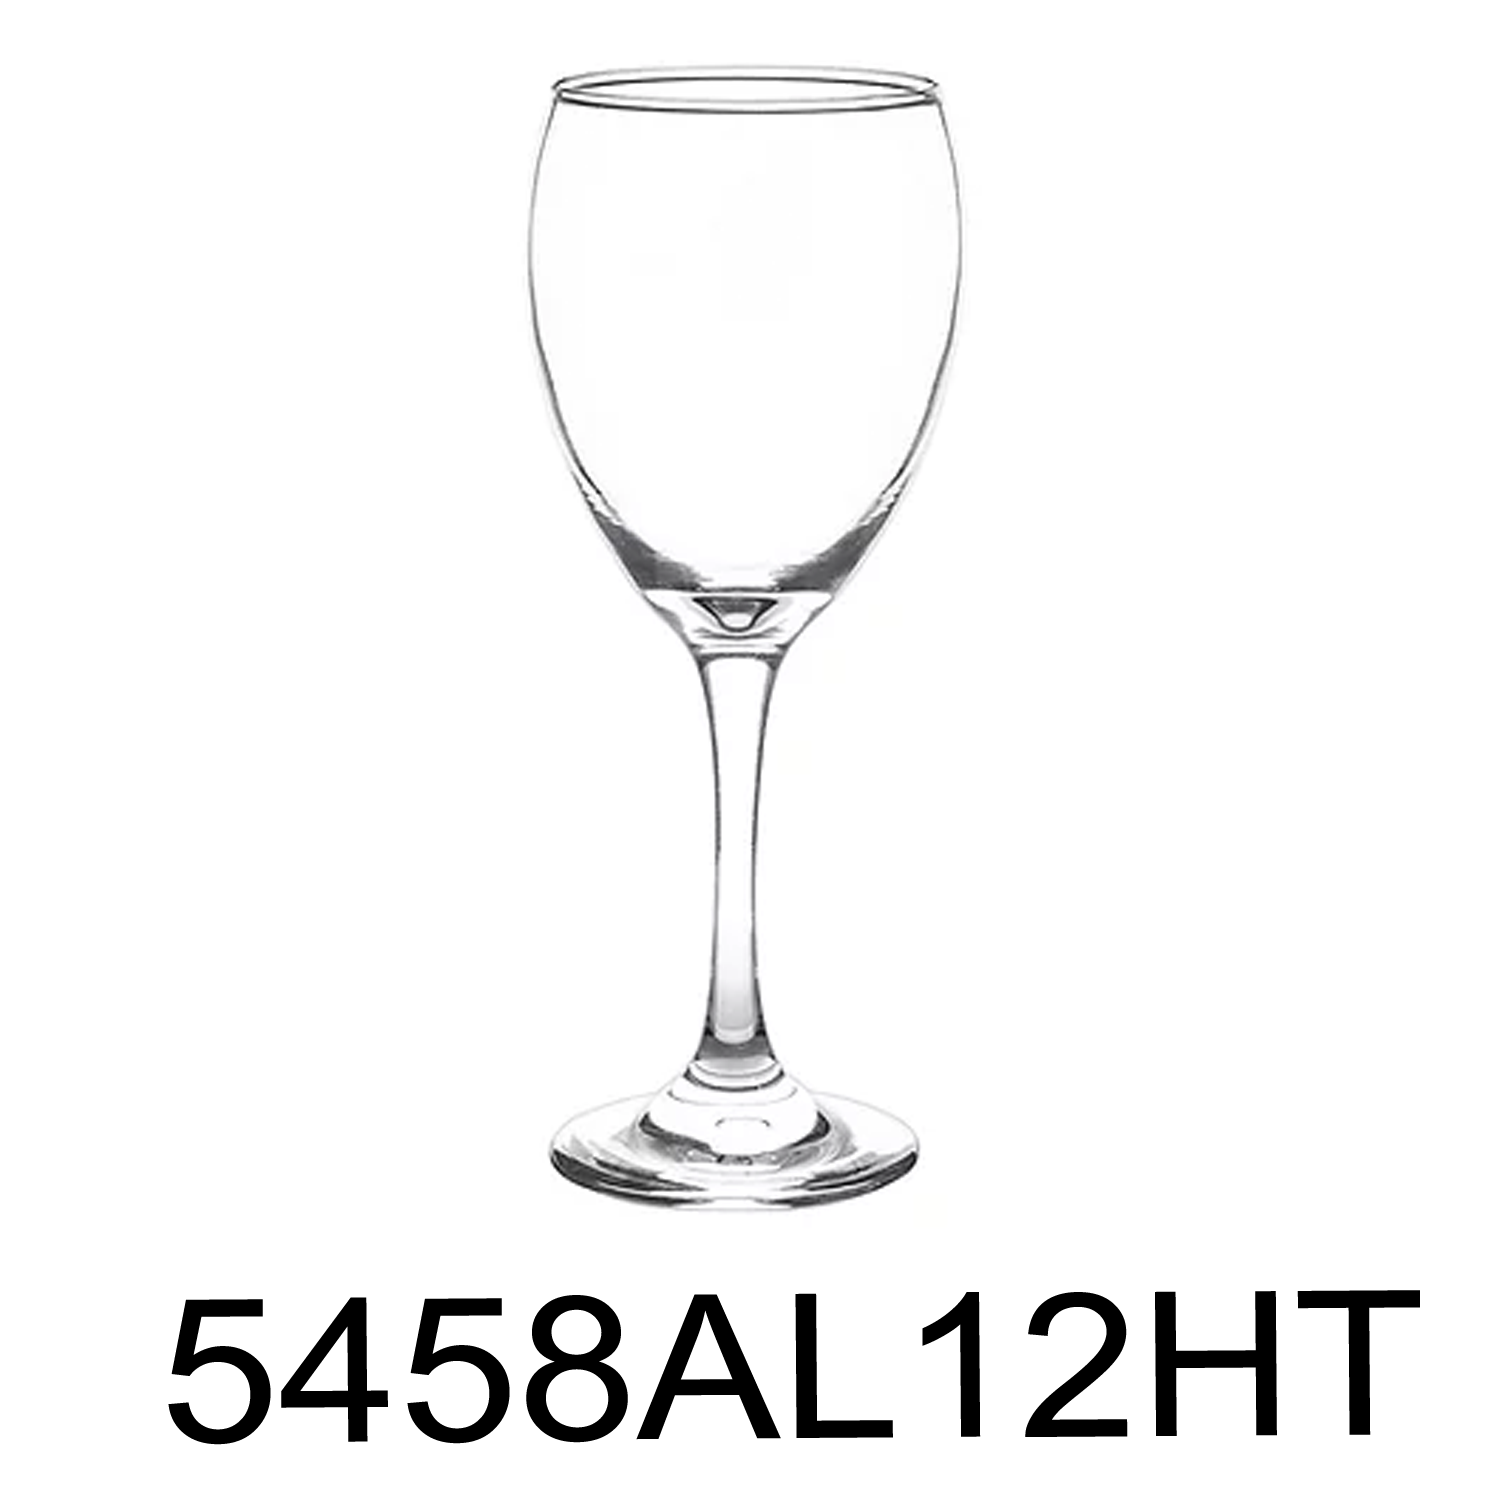 Cristar Stemless Wine Glasses Set of 4, 15.5 Ounce